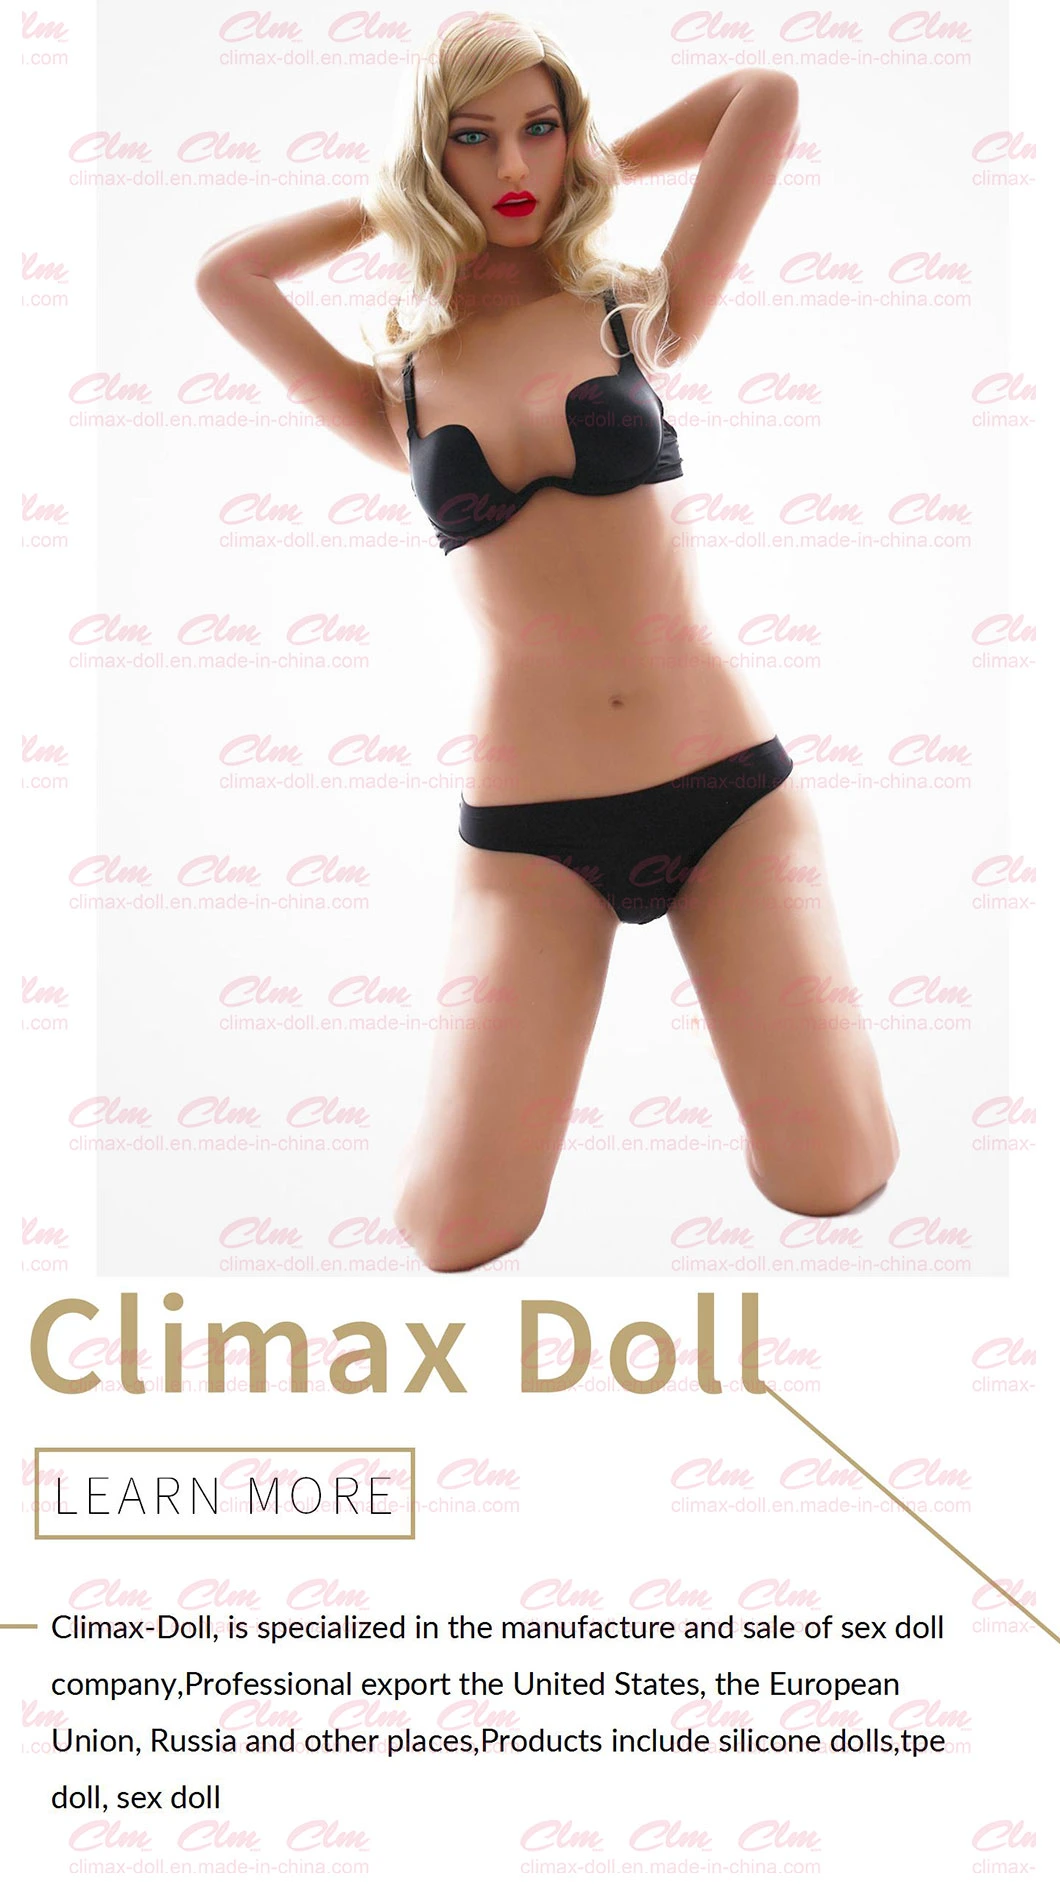 Clm (Climax Doll) 175cm Huge Breast Love Sex Doll Sex Toy for Men